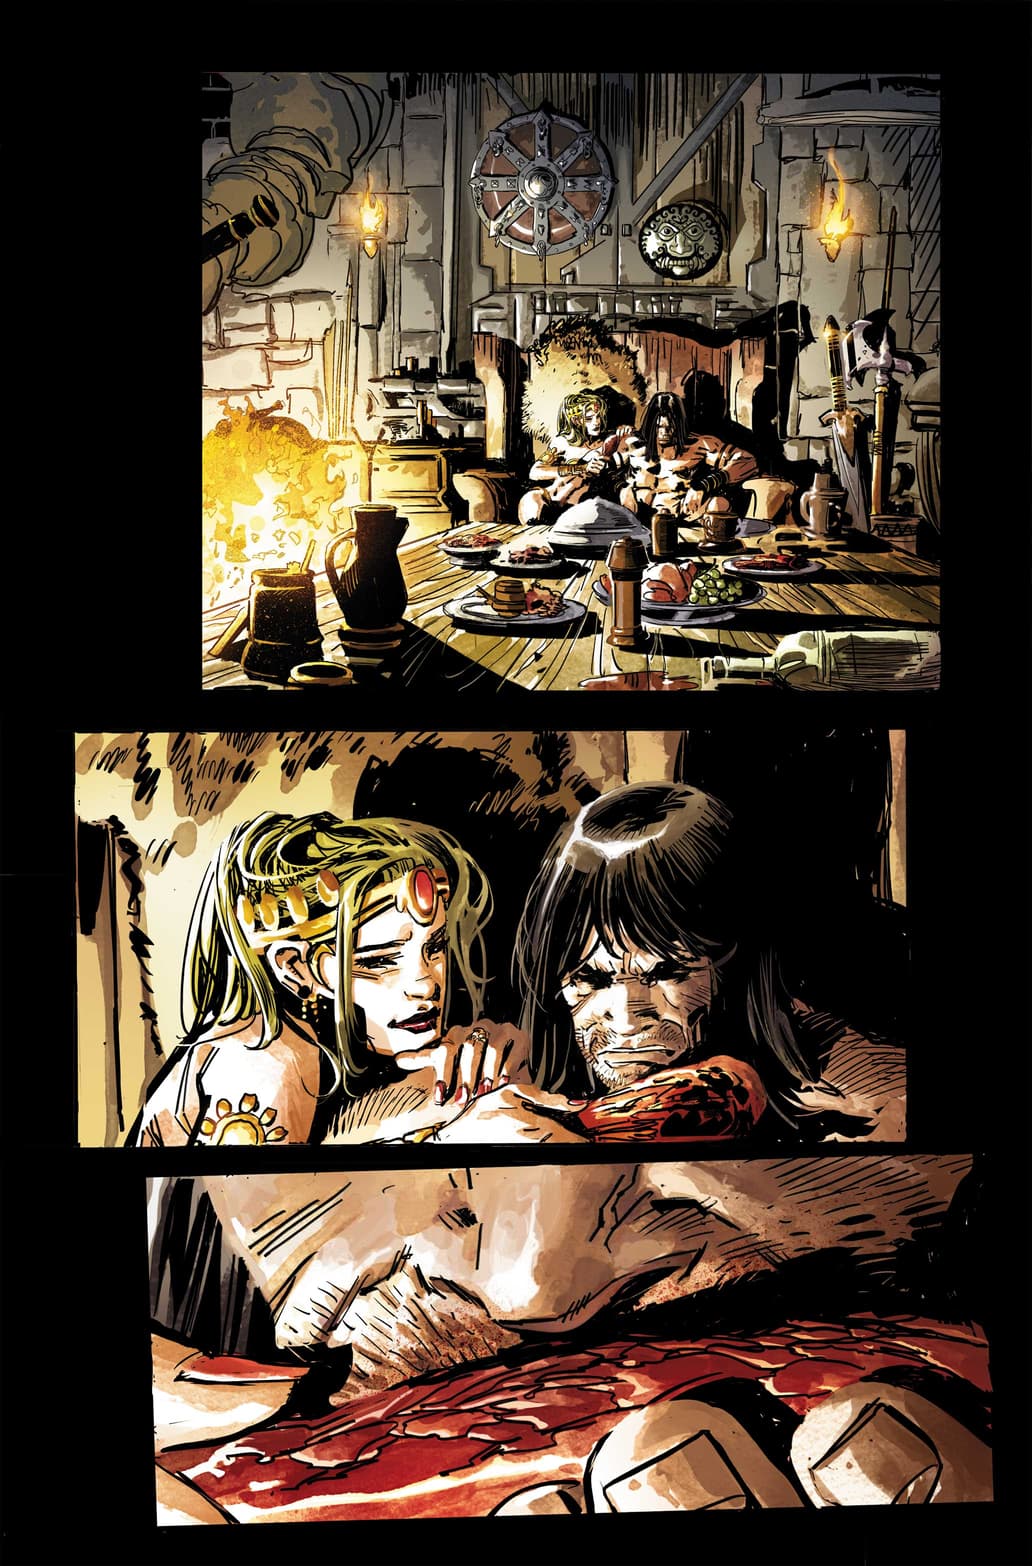 Preview page from Savage Sword of Conan